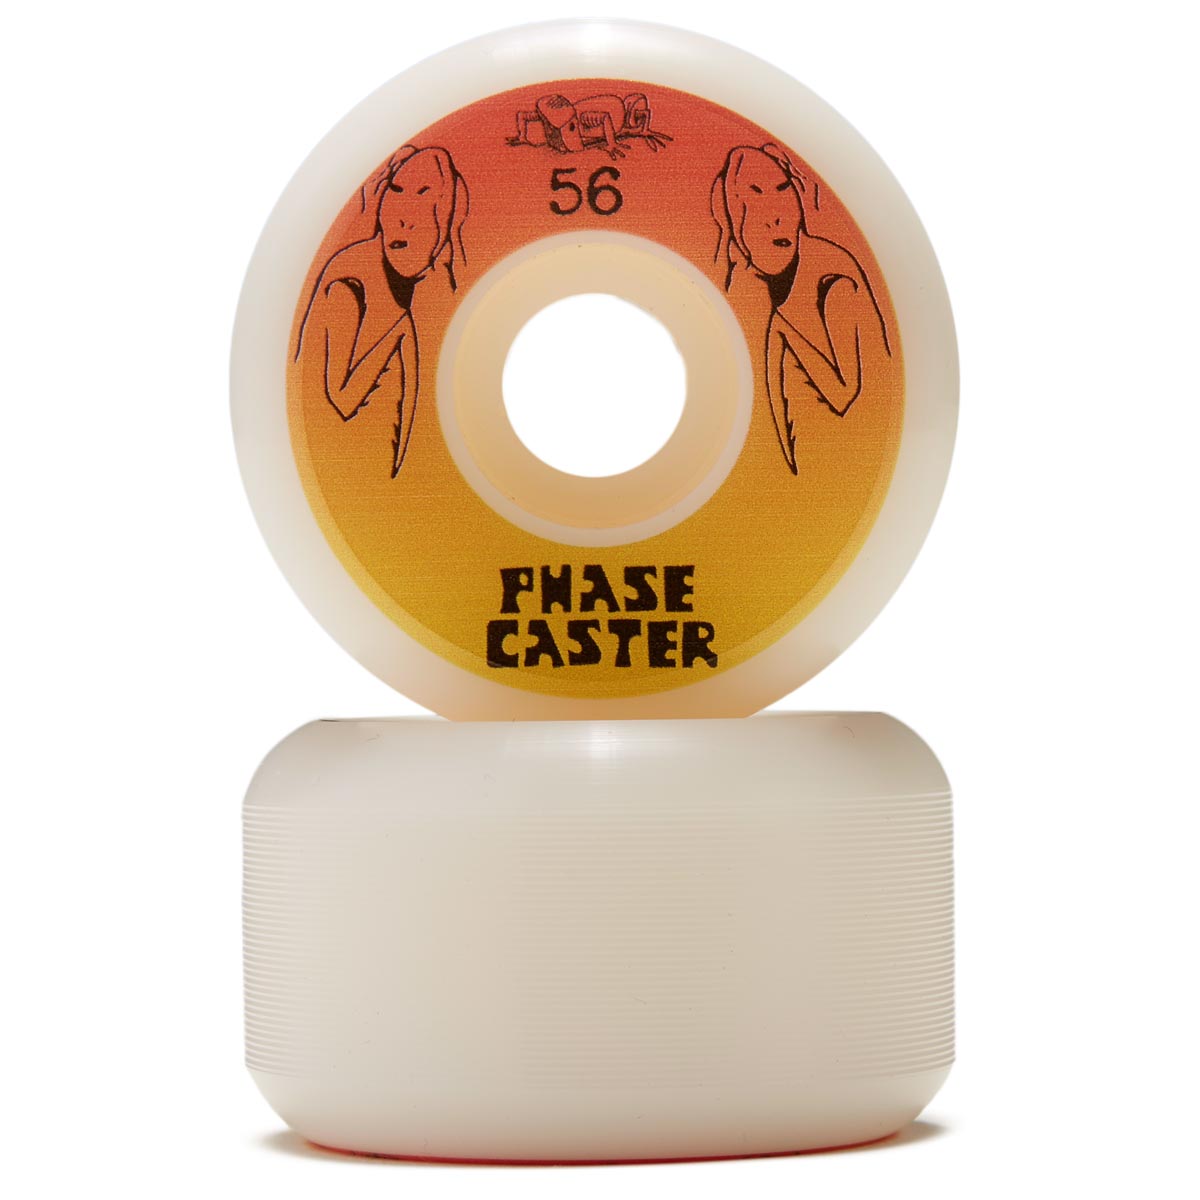 The Heated Wheel Phasecaster Mantis Man 101a Skateboard Wheels - 56mm image 2